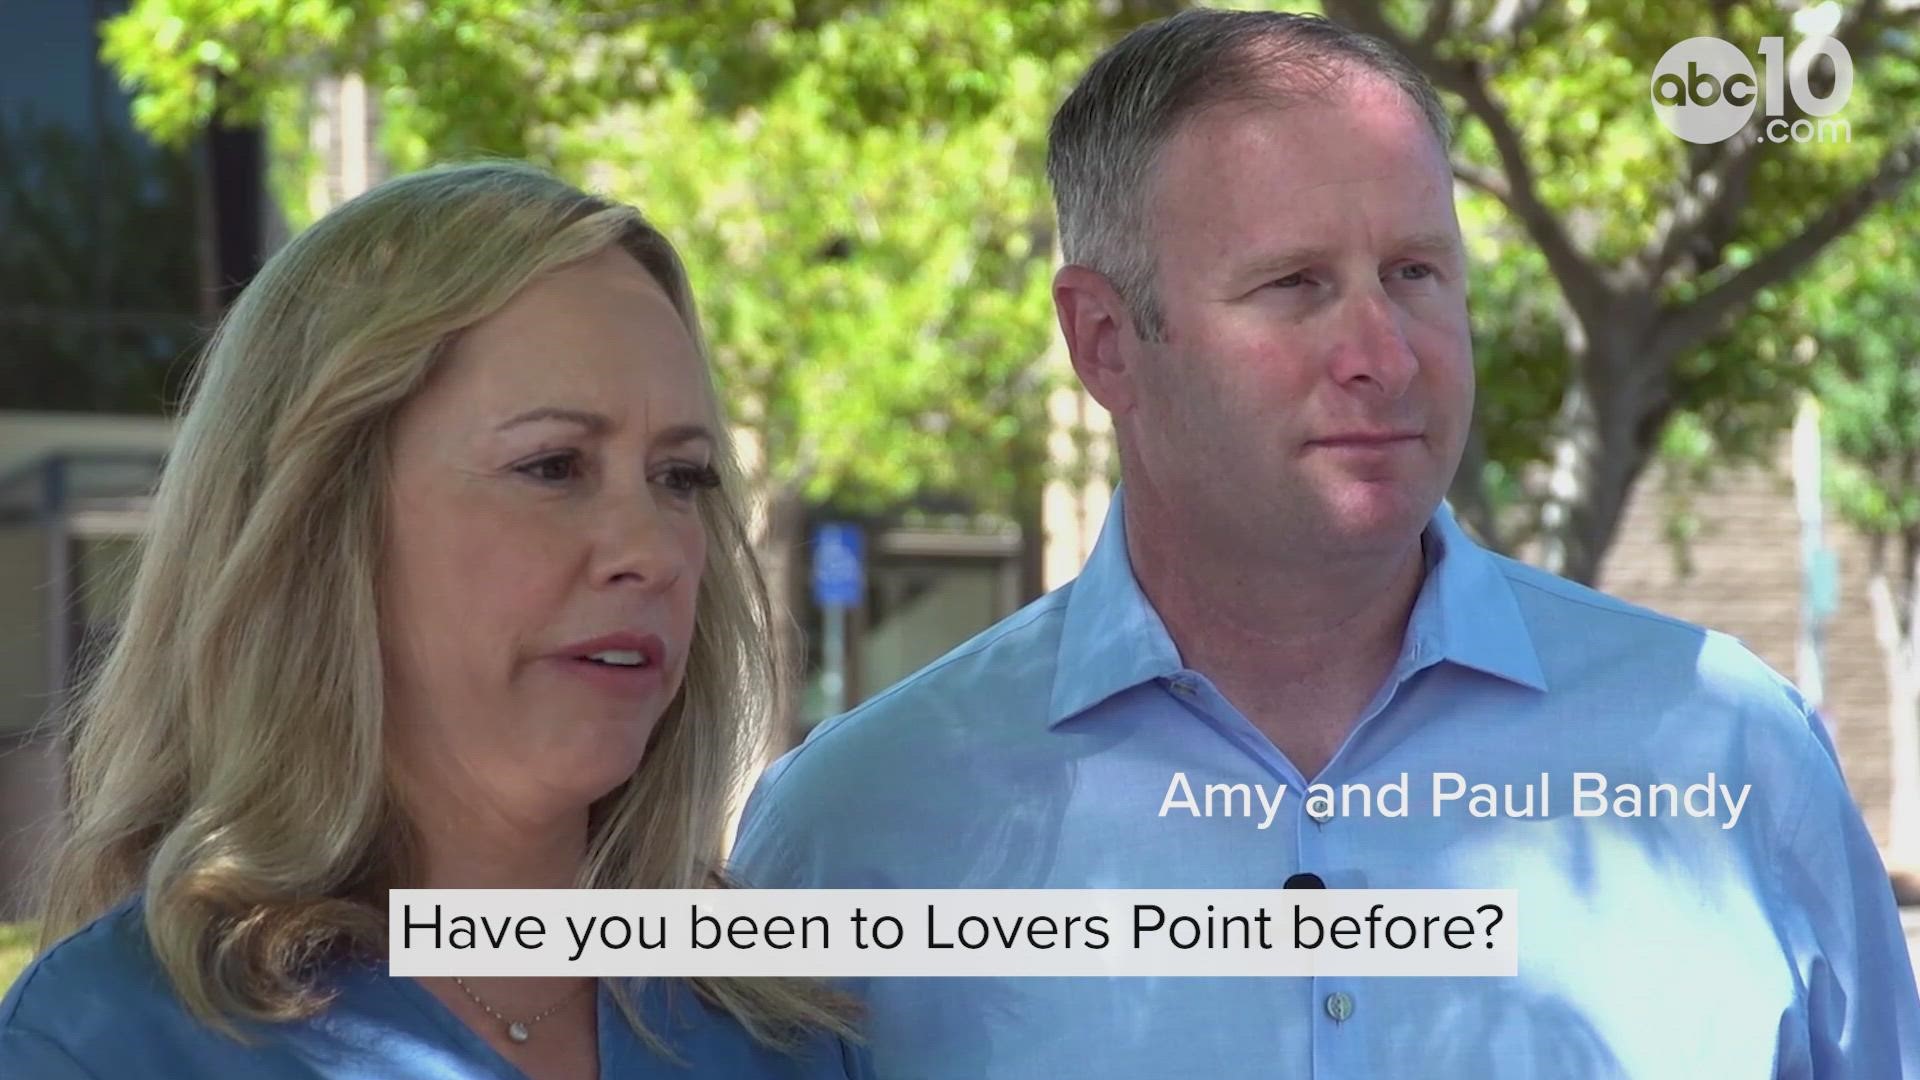 Officer Paul Bandy and his wife Amy talked about their experience saving a man from what could have been a deadly shark attack.